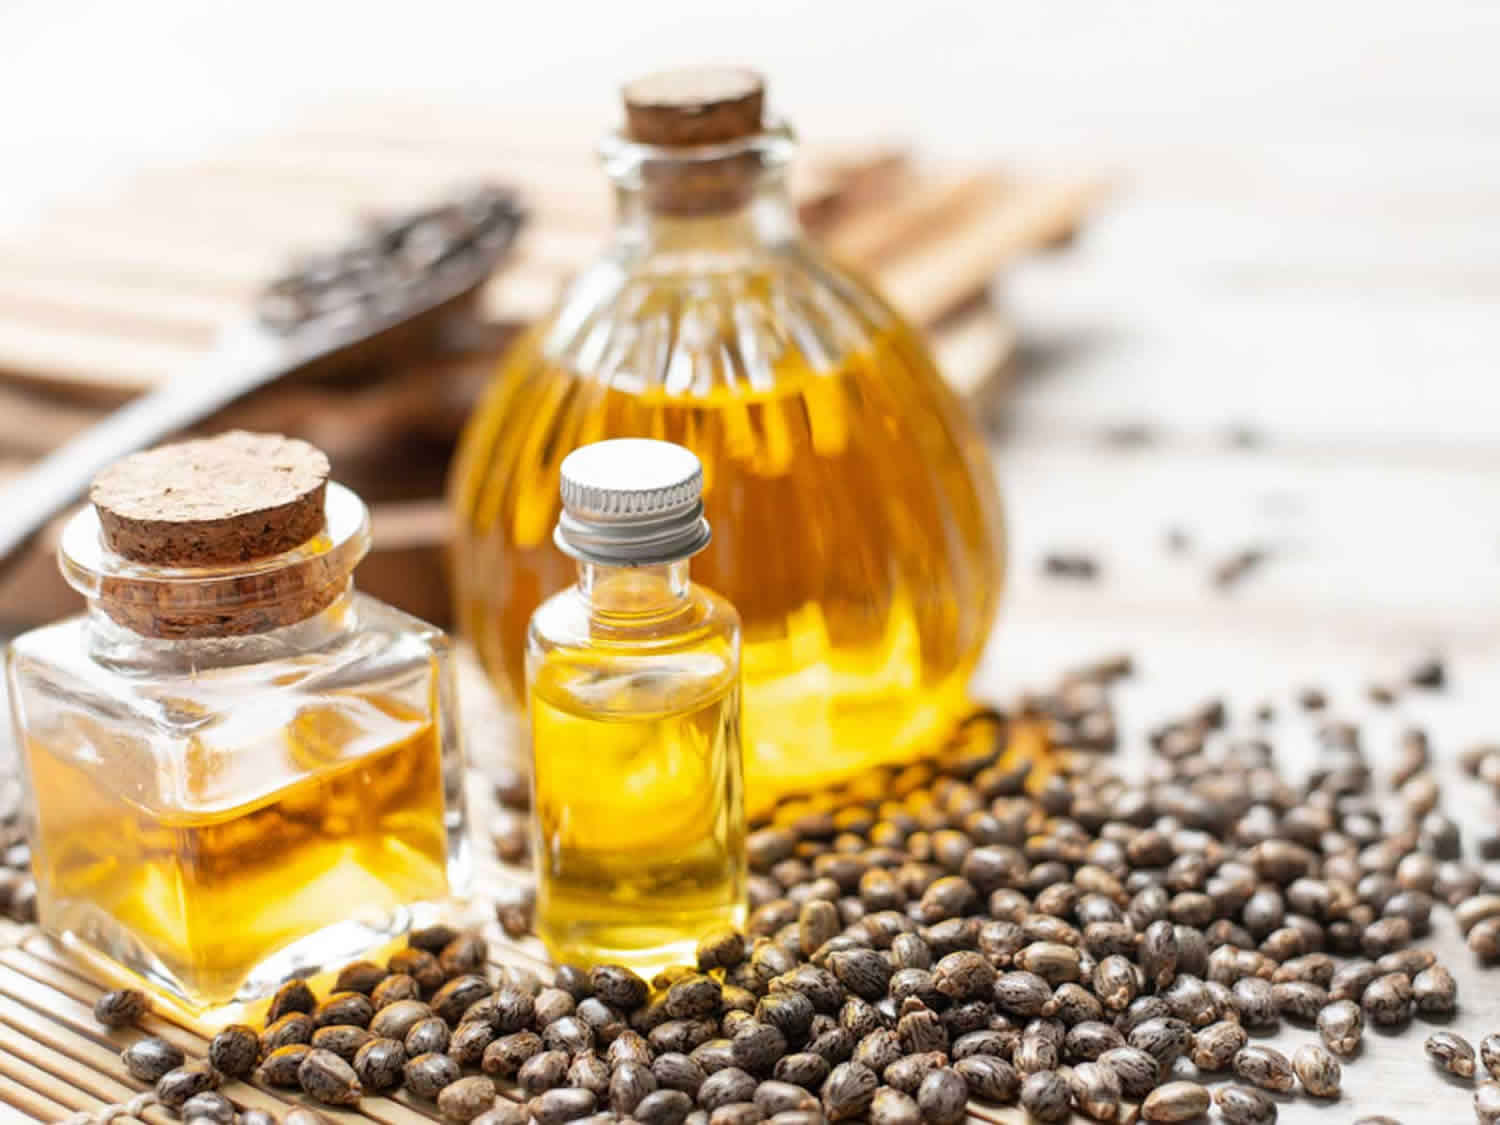 Castor oil, uses, production, safety & side effects